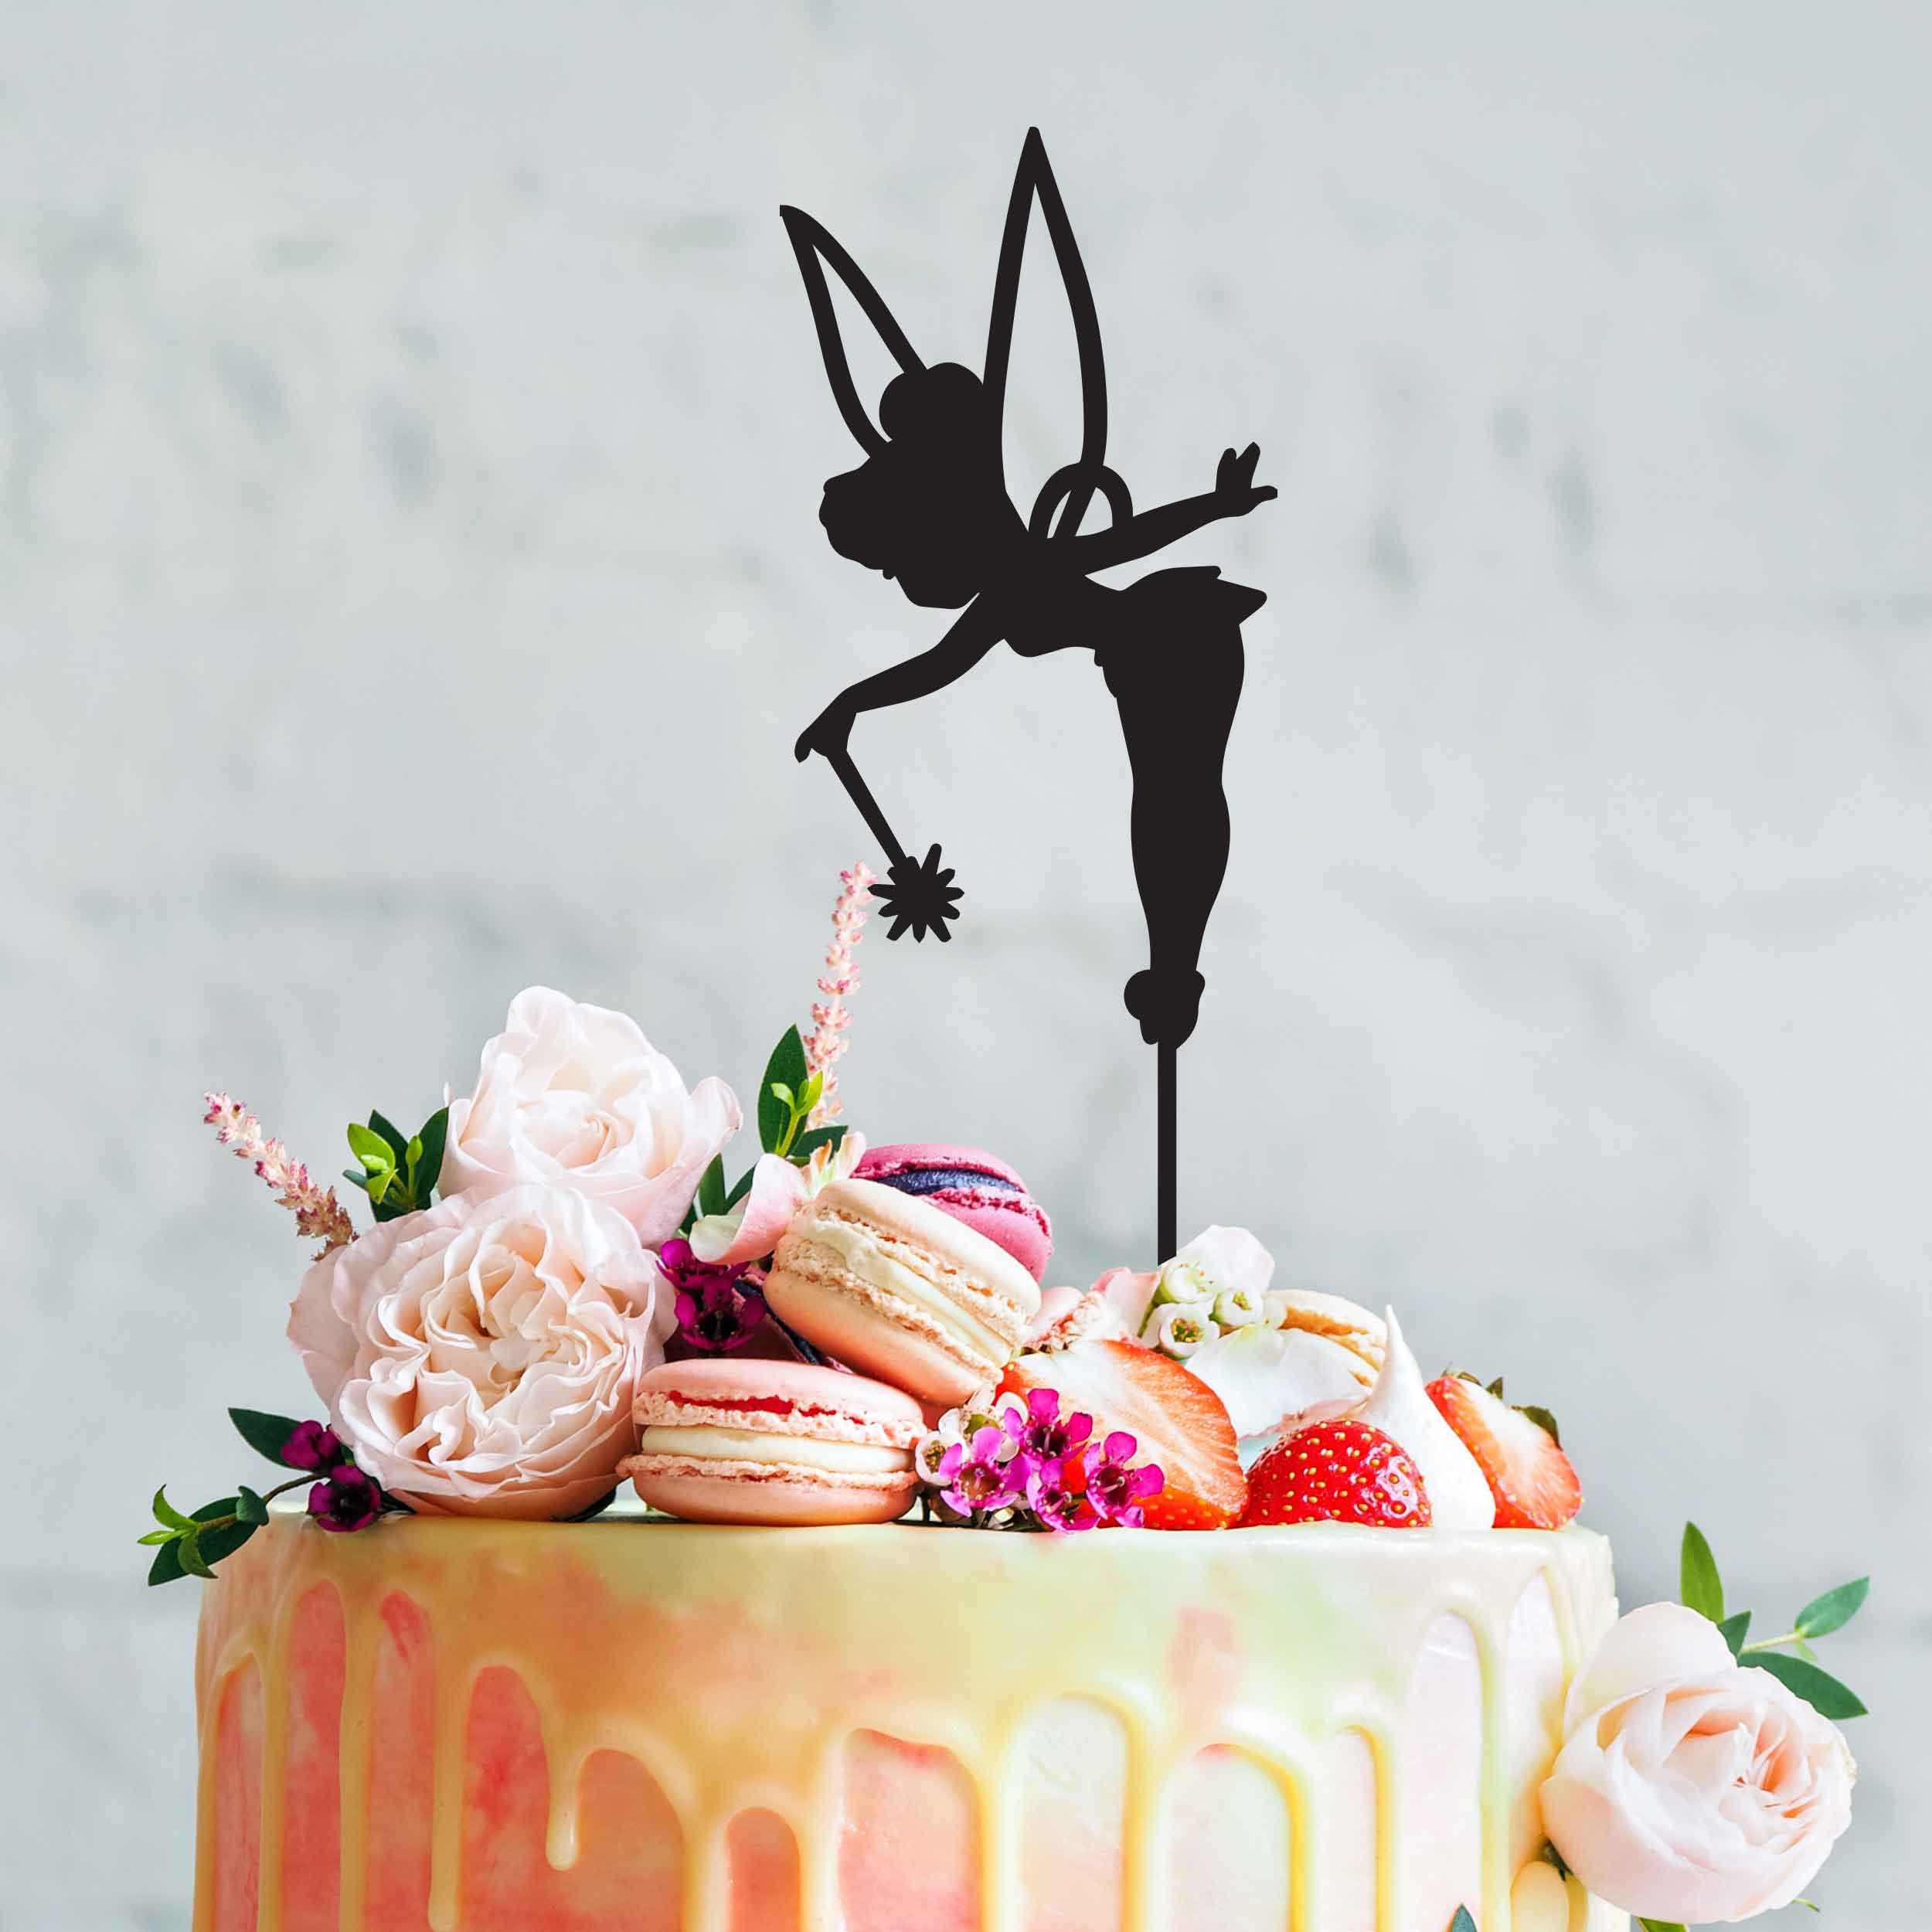 Some Beautiful Tinkerbell Themed cakes / Tinkerbell Cake Ideas - Part 2